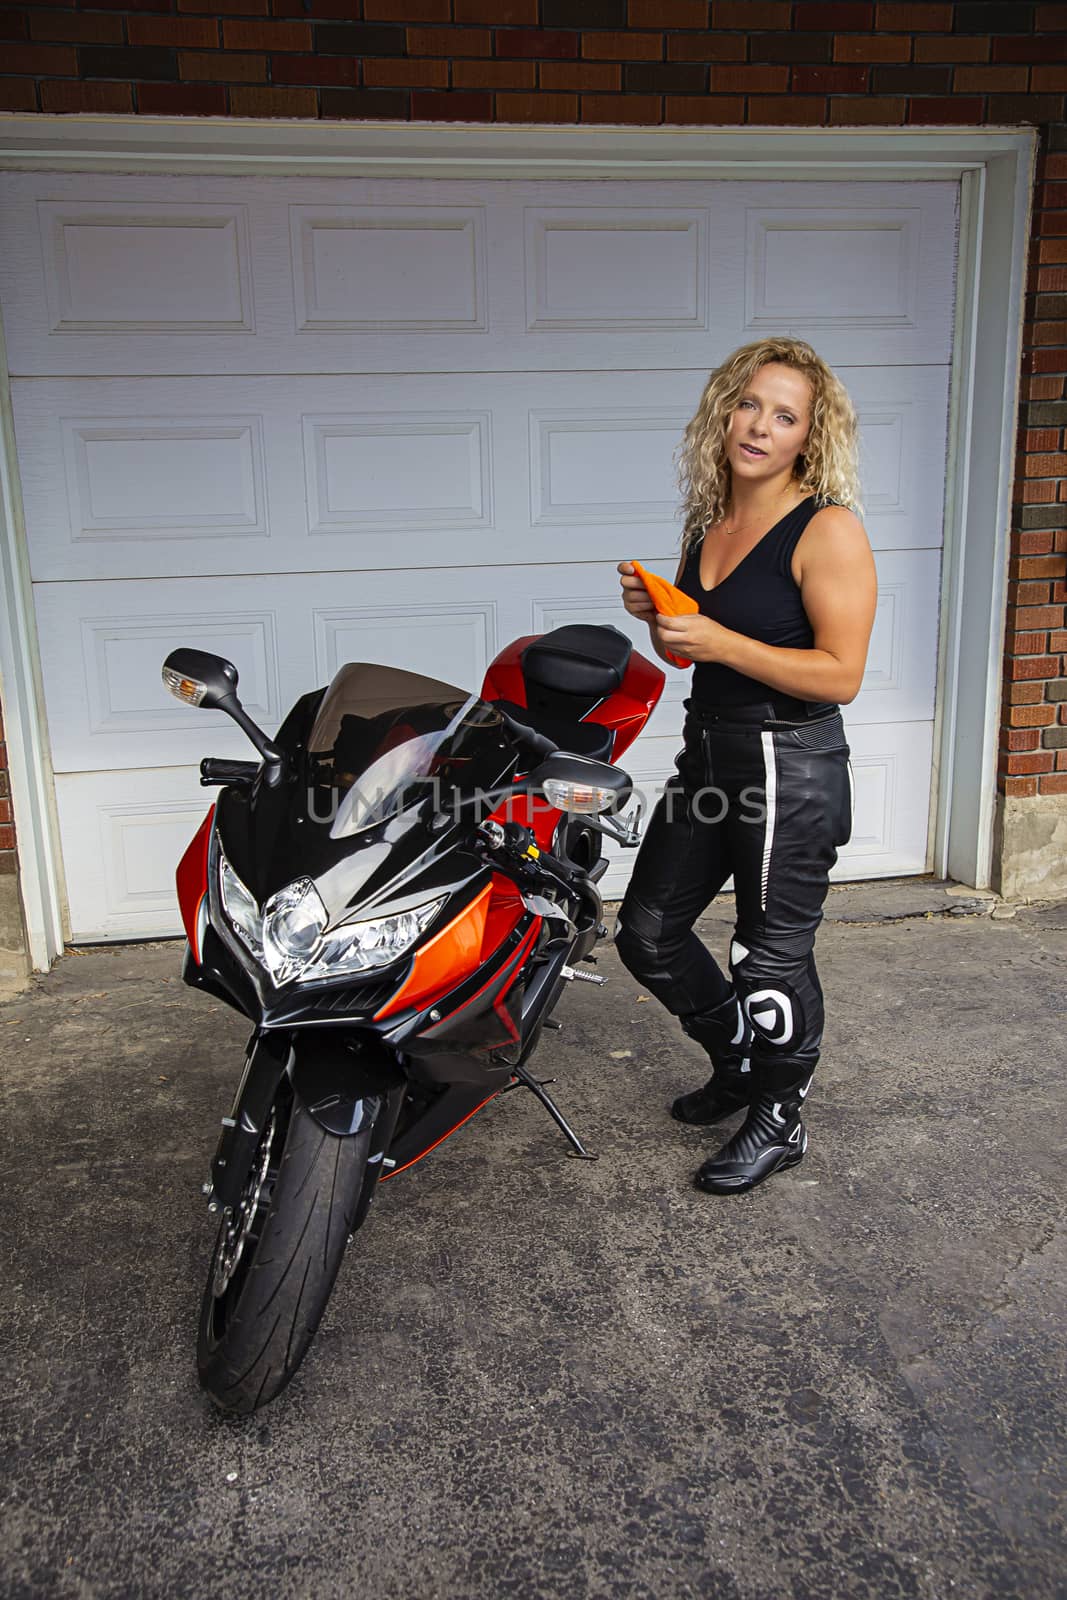 twenty something blond hair woman, about to clean a sport motocycle, in front a of garage door